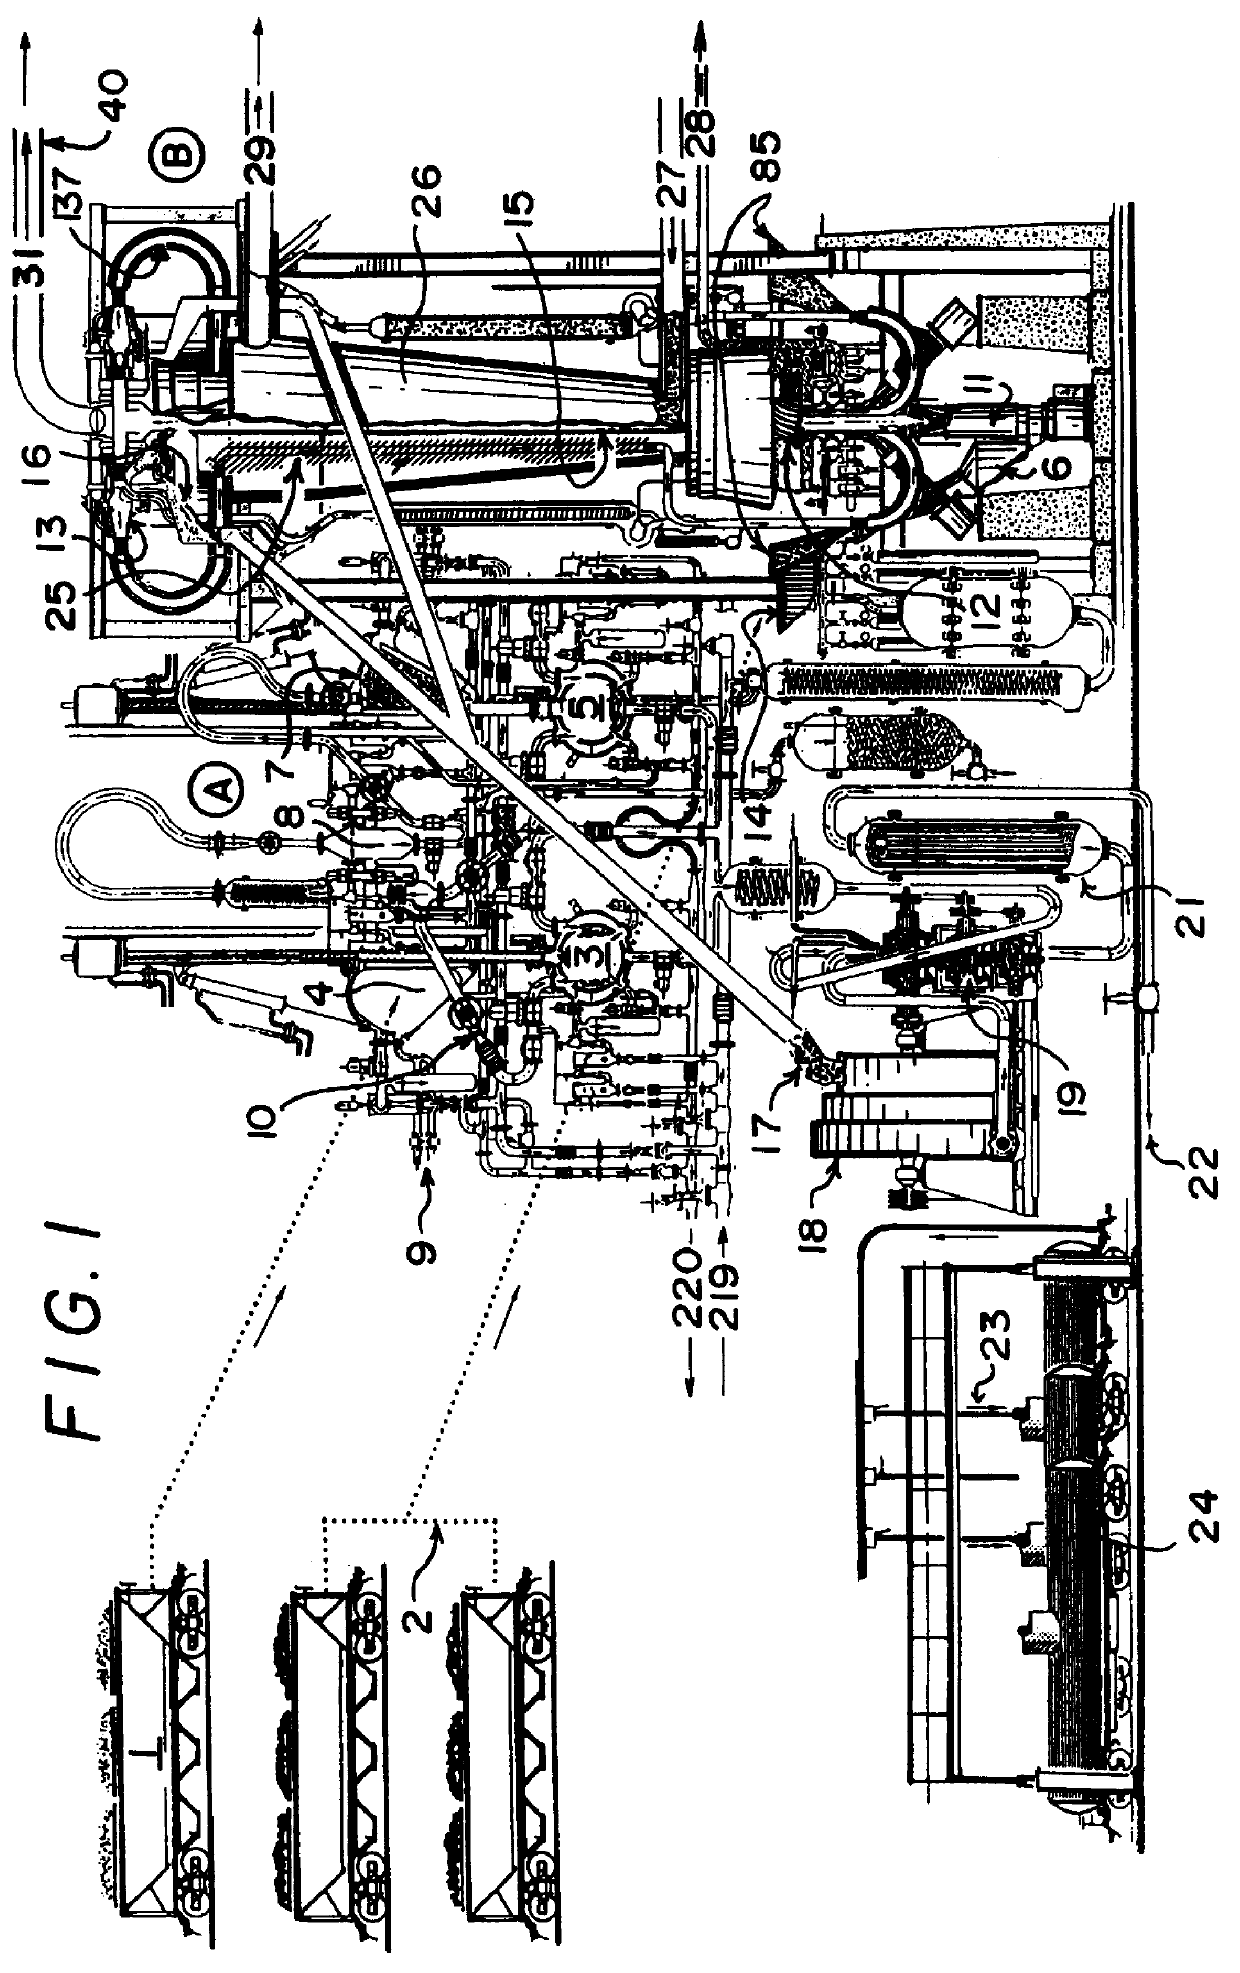 Apparatus for converting coal to hydrocarbons